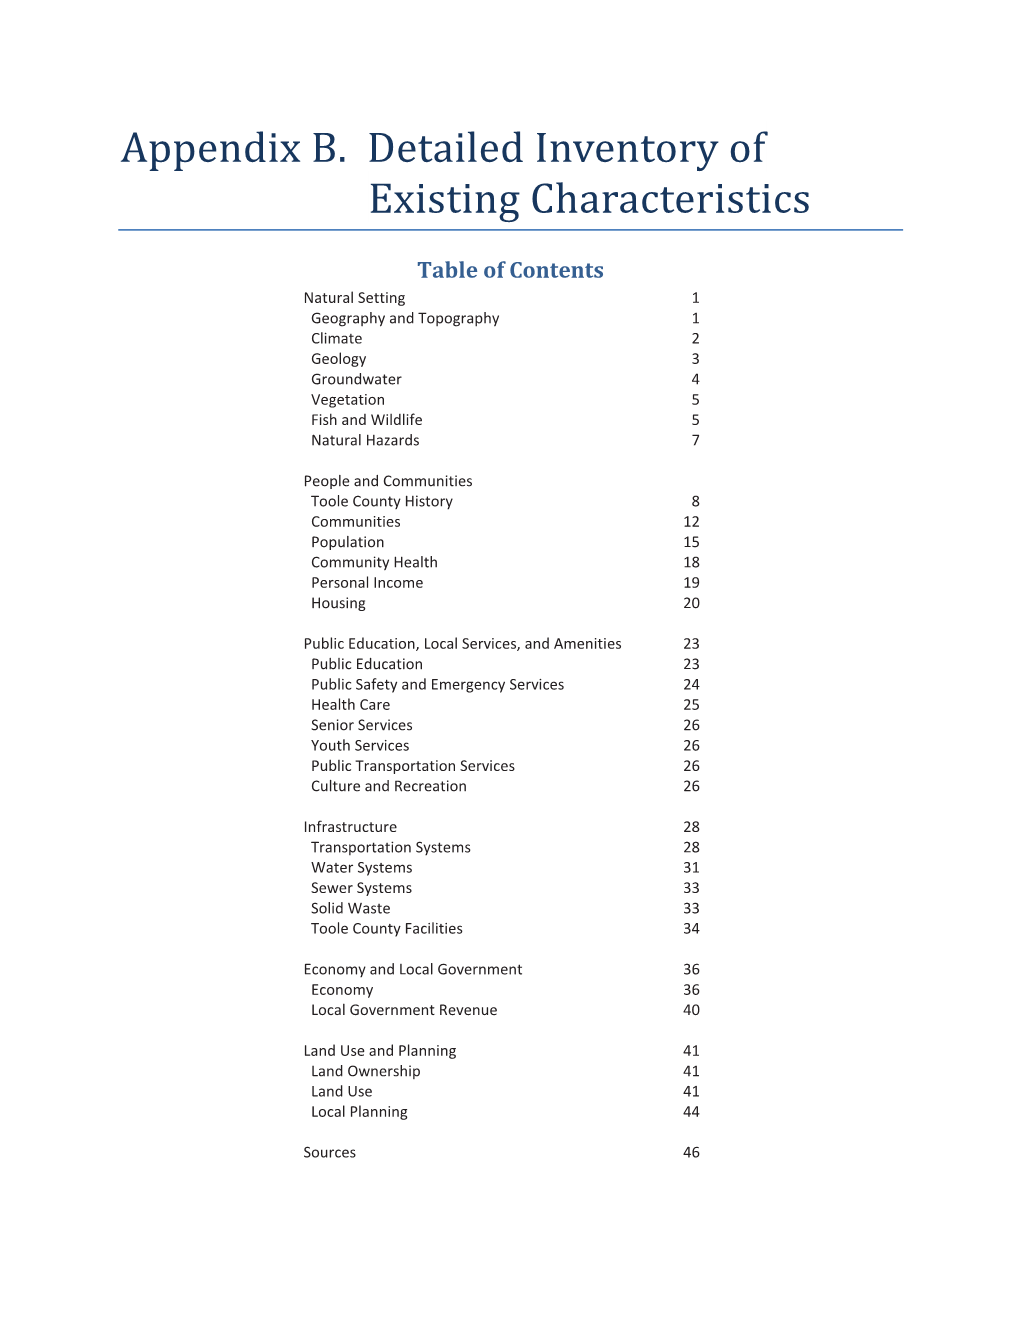 Appendix B. Detailed Inventory of Existing Characteristics